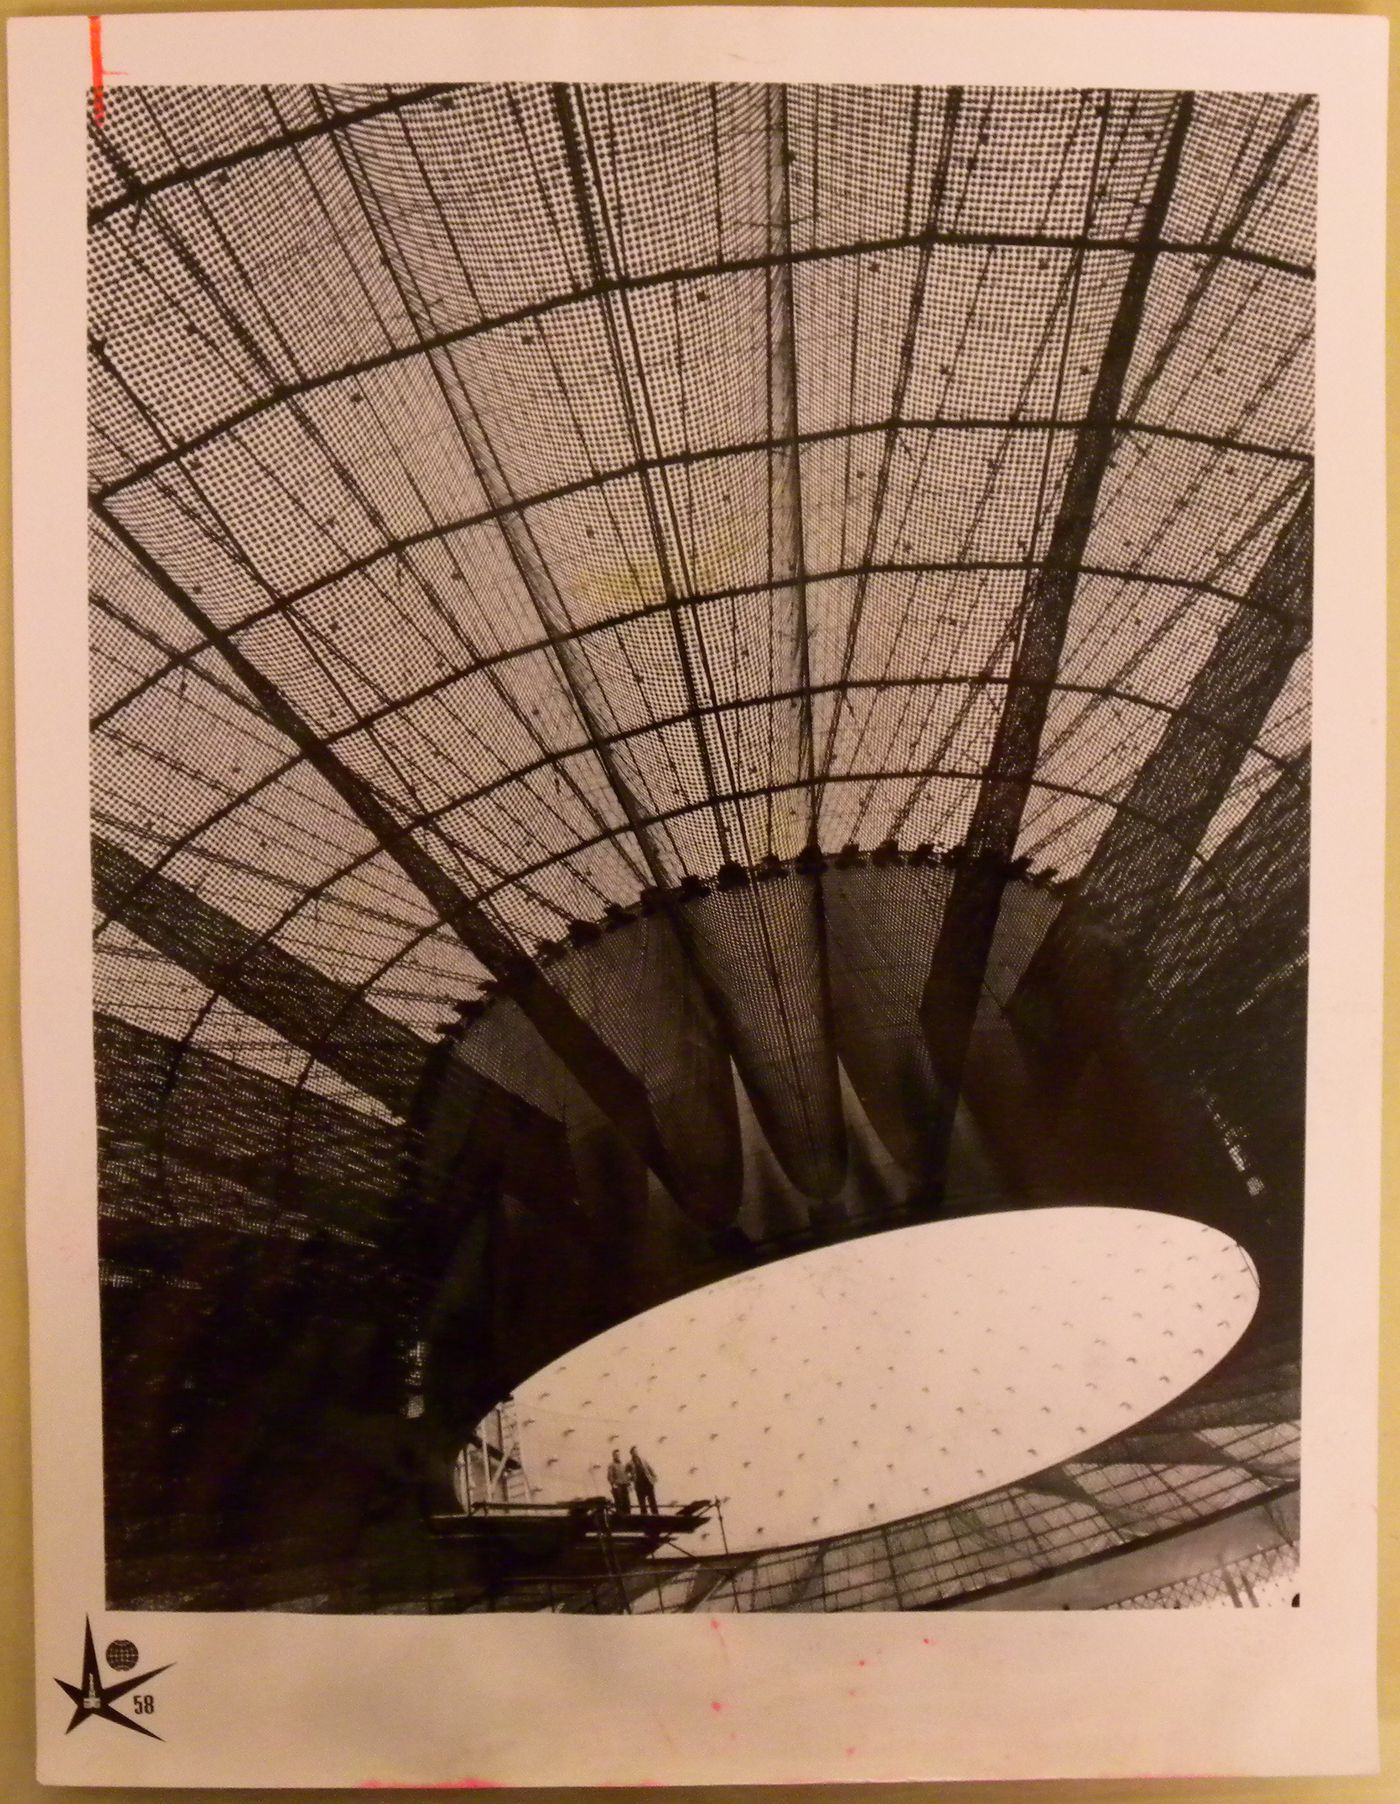 View of the mesh ceiling of the Pavilion of the United States, Expo 58, Brussels, Belgium